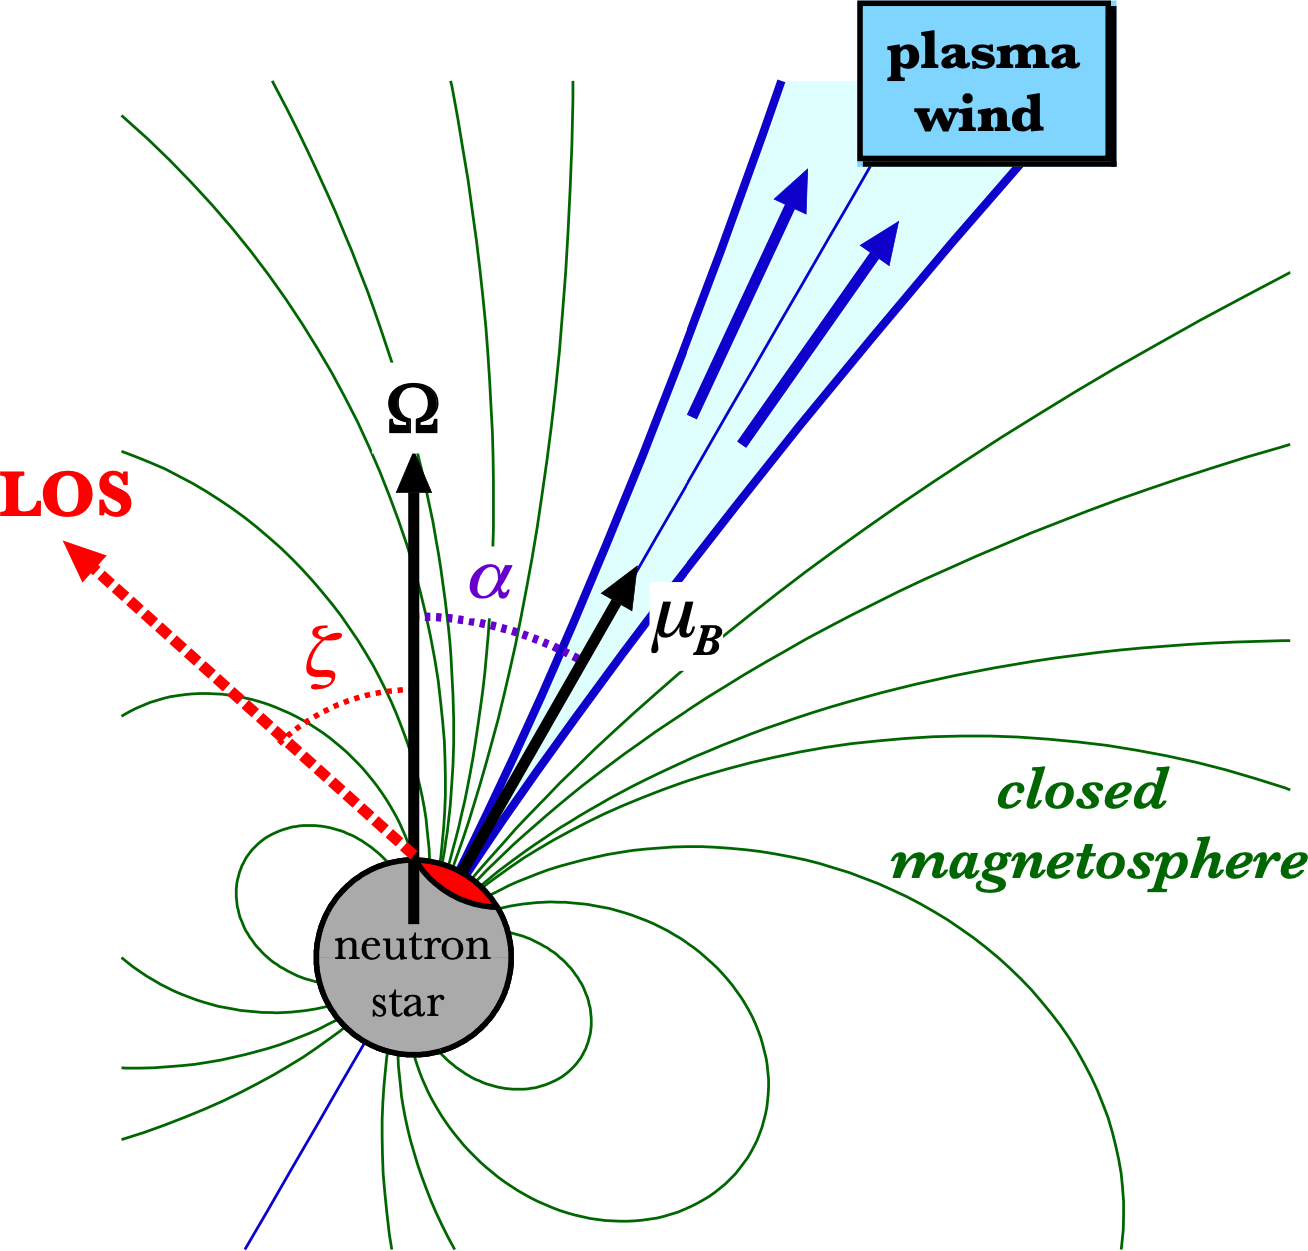 Sketch of the magnetar's field geometry and hypothesized plasma wind responsible for the radio bursts and persistent emission seen a few days after the spin glitch. Indicated angles are α between the neutron star's magnetic (μB) and rotation (Ω) axes, and ζ between Ω and the observer's line of sight (LOS, which is fixed while the μB vector rotates about Ω). The hot magnetic polar cap that produces the observed thermal X-ray pulsations is shown in red, closed (approximately dipolar) magnetic field lines are shown in green, and 'open' field lines are shown in blue; the latter are thought to be highly twisted under normal circumstances, suppressing particle flows and radio emission, but a sudden strong injection of plasma from the surface during a glitch 'combed' the open field lines to a nearly radial configuration, clearing the way for radio emission. Figure from Younes et al. 2022 (Nature Astronomy, in press).